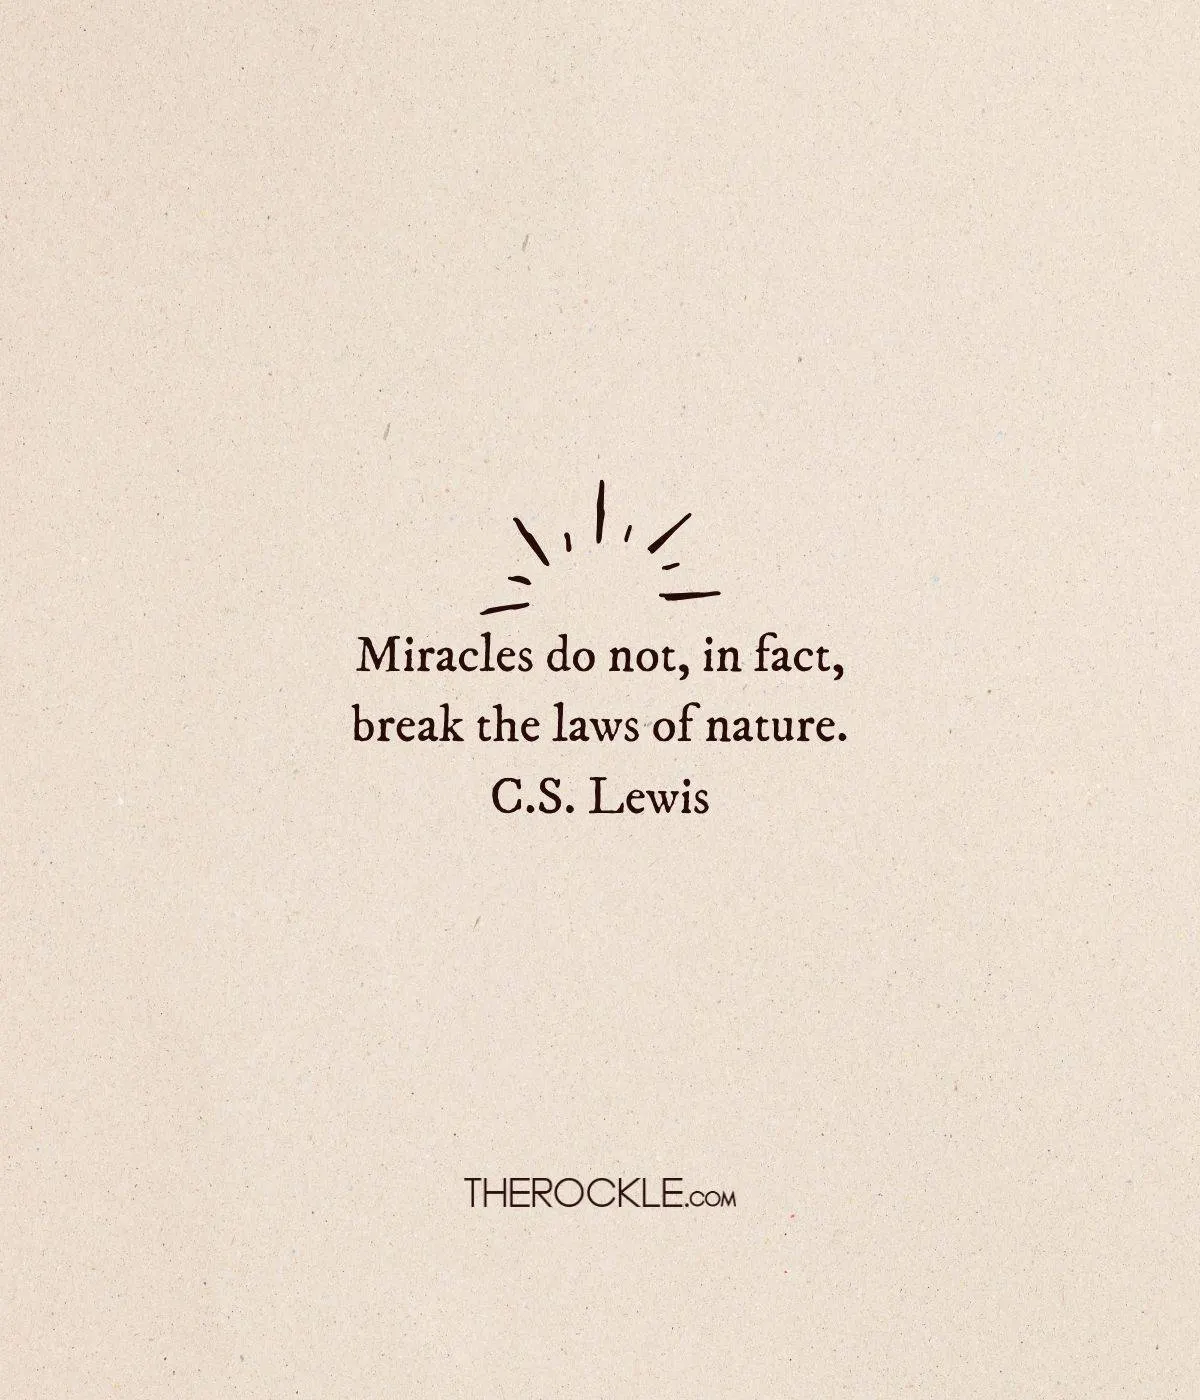 C.S. Lewis on miracles